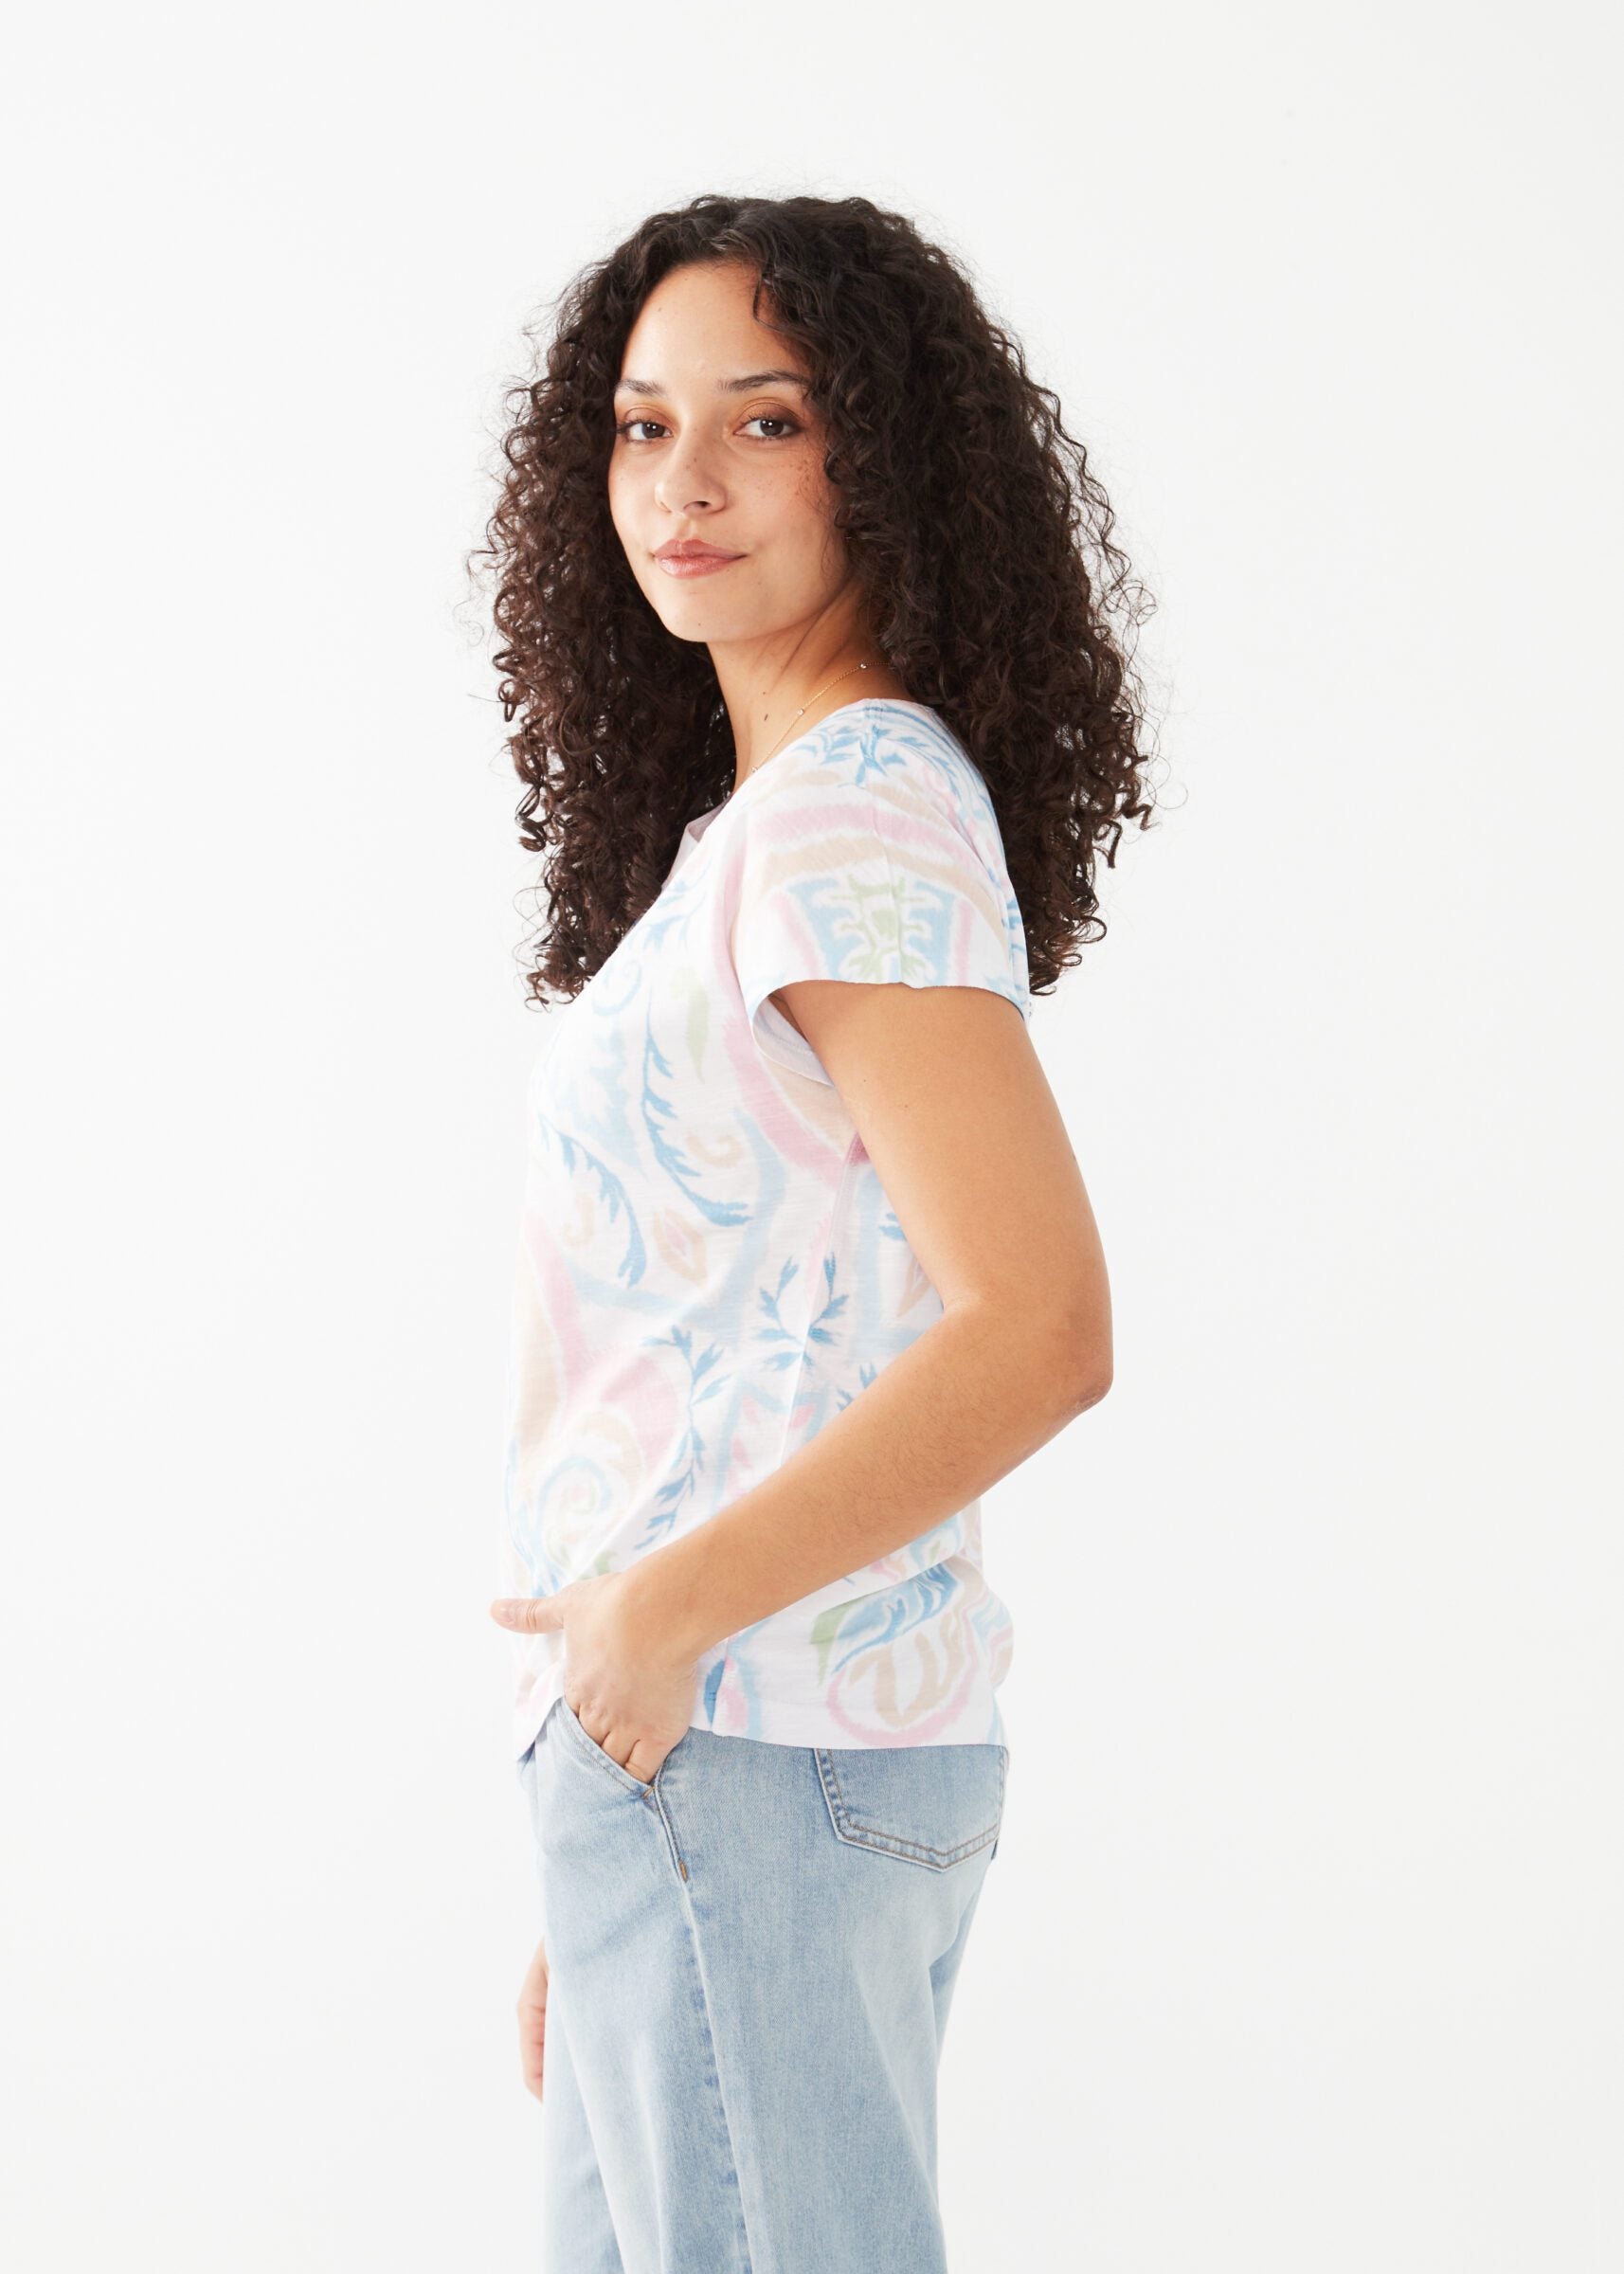 This playful top's dolman short sleeves add a touch of whimsy to your outfit. With its soft jersey fabric, you'll be comfortable and stylish all day long. Perfect for a day out with friends or a casual weekend look.